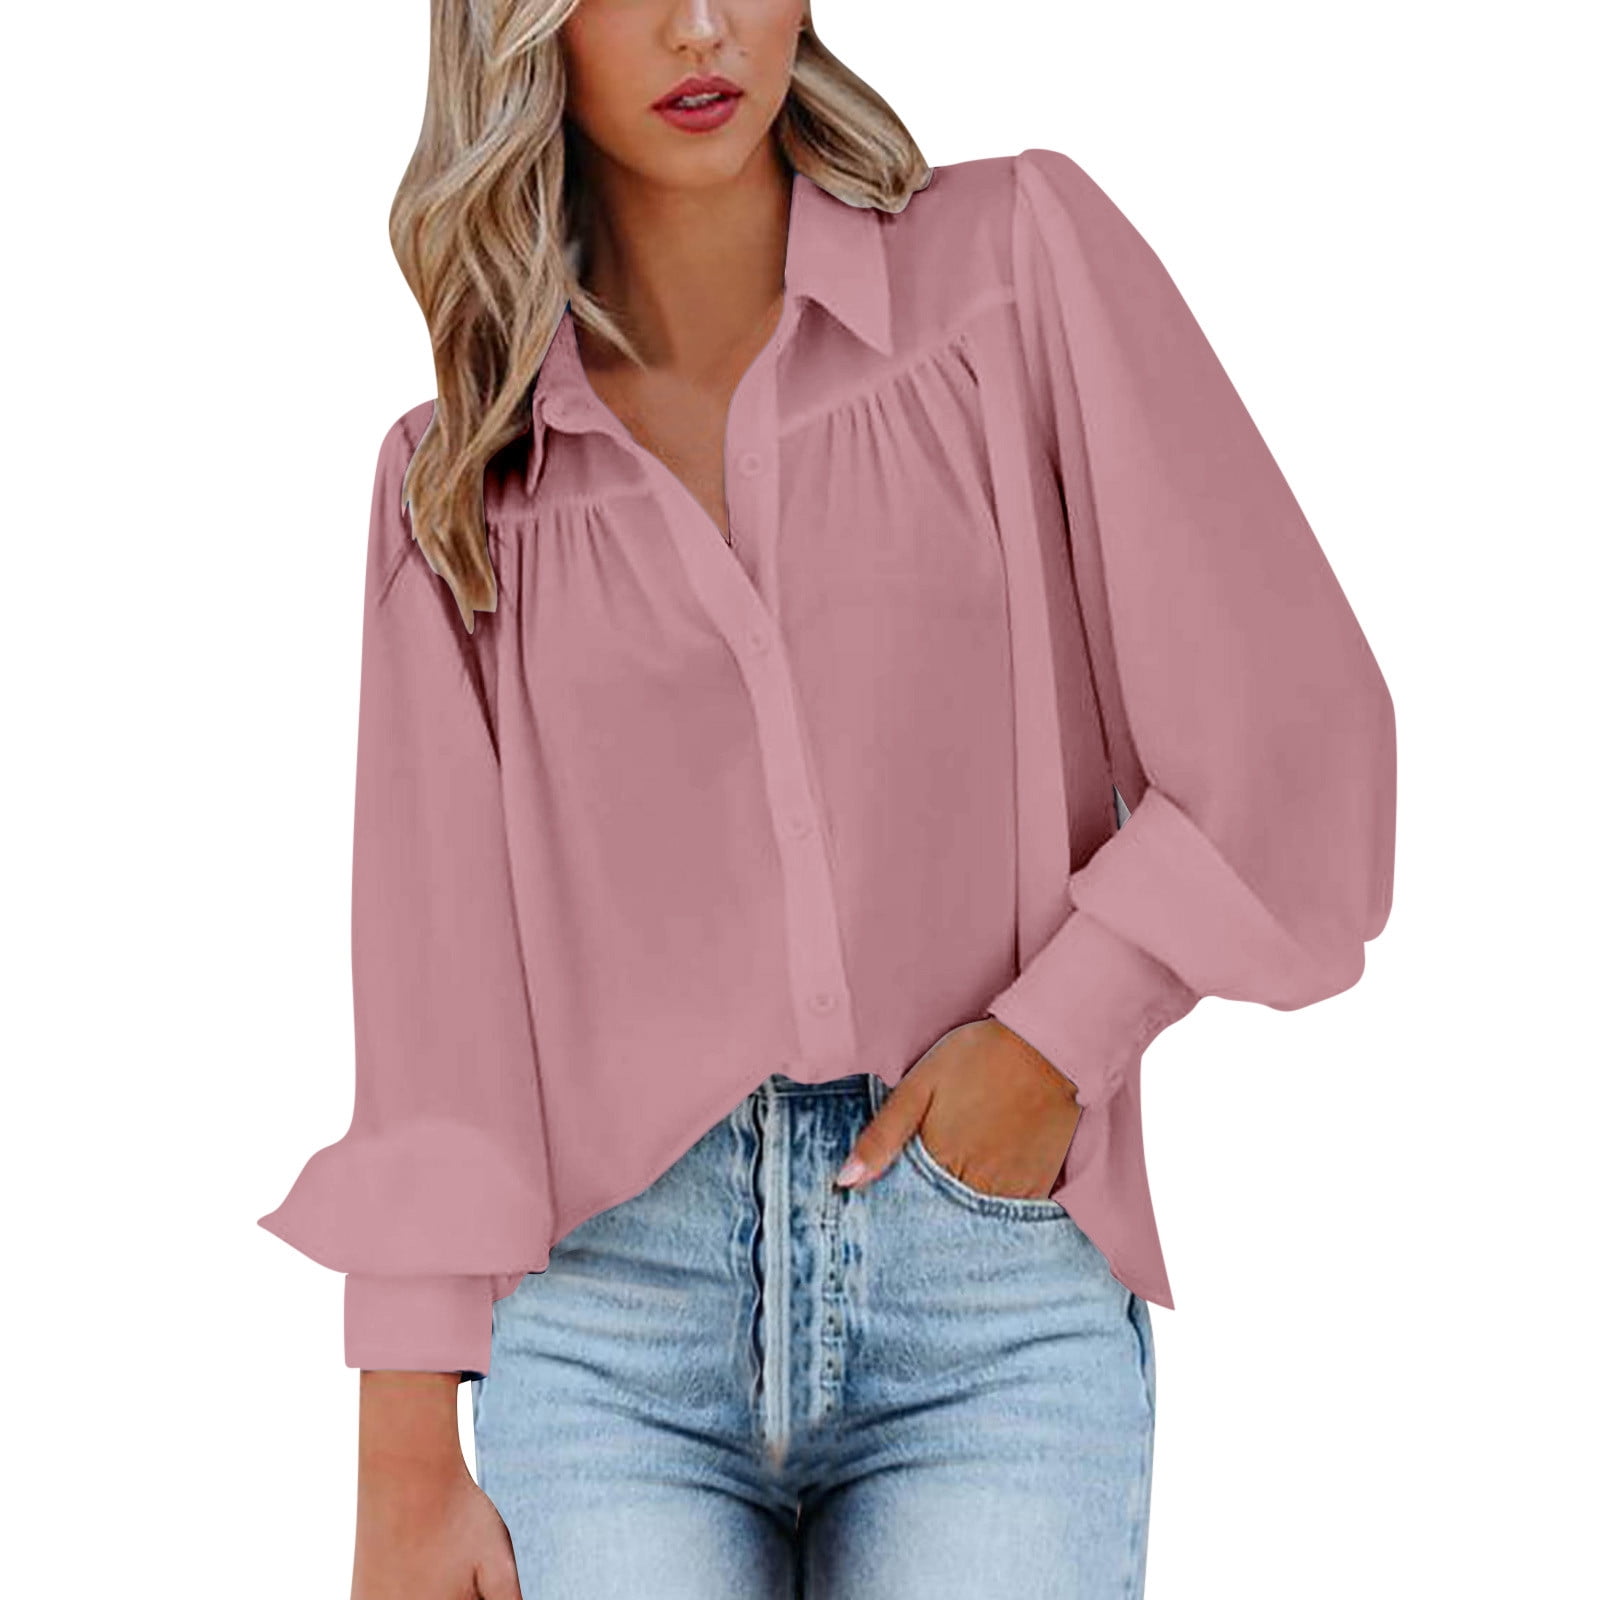 adviicd Button-Down Shirts For Women Summer Blouses For Women